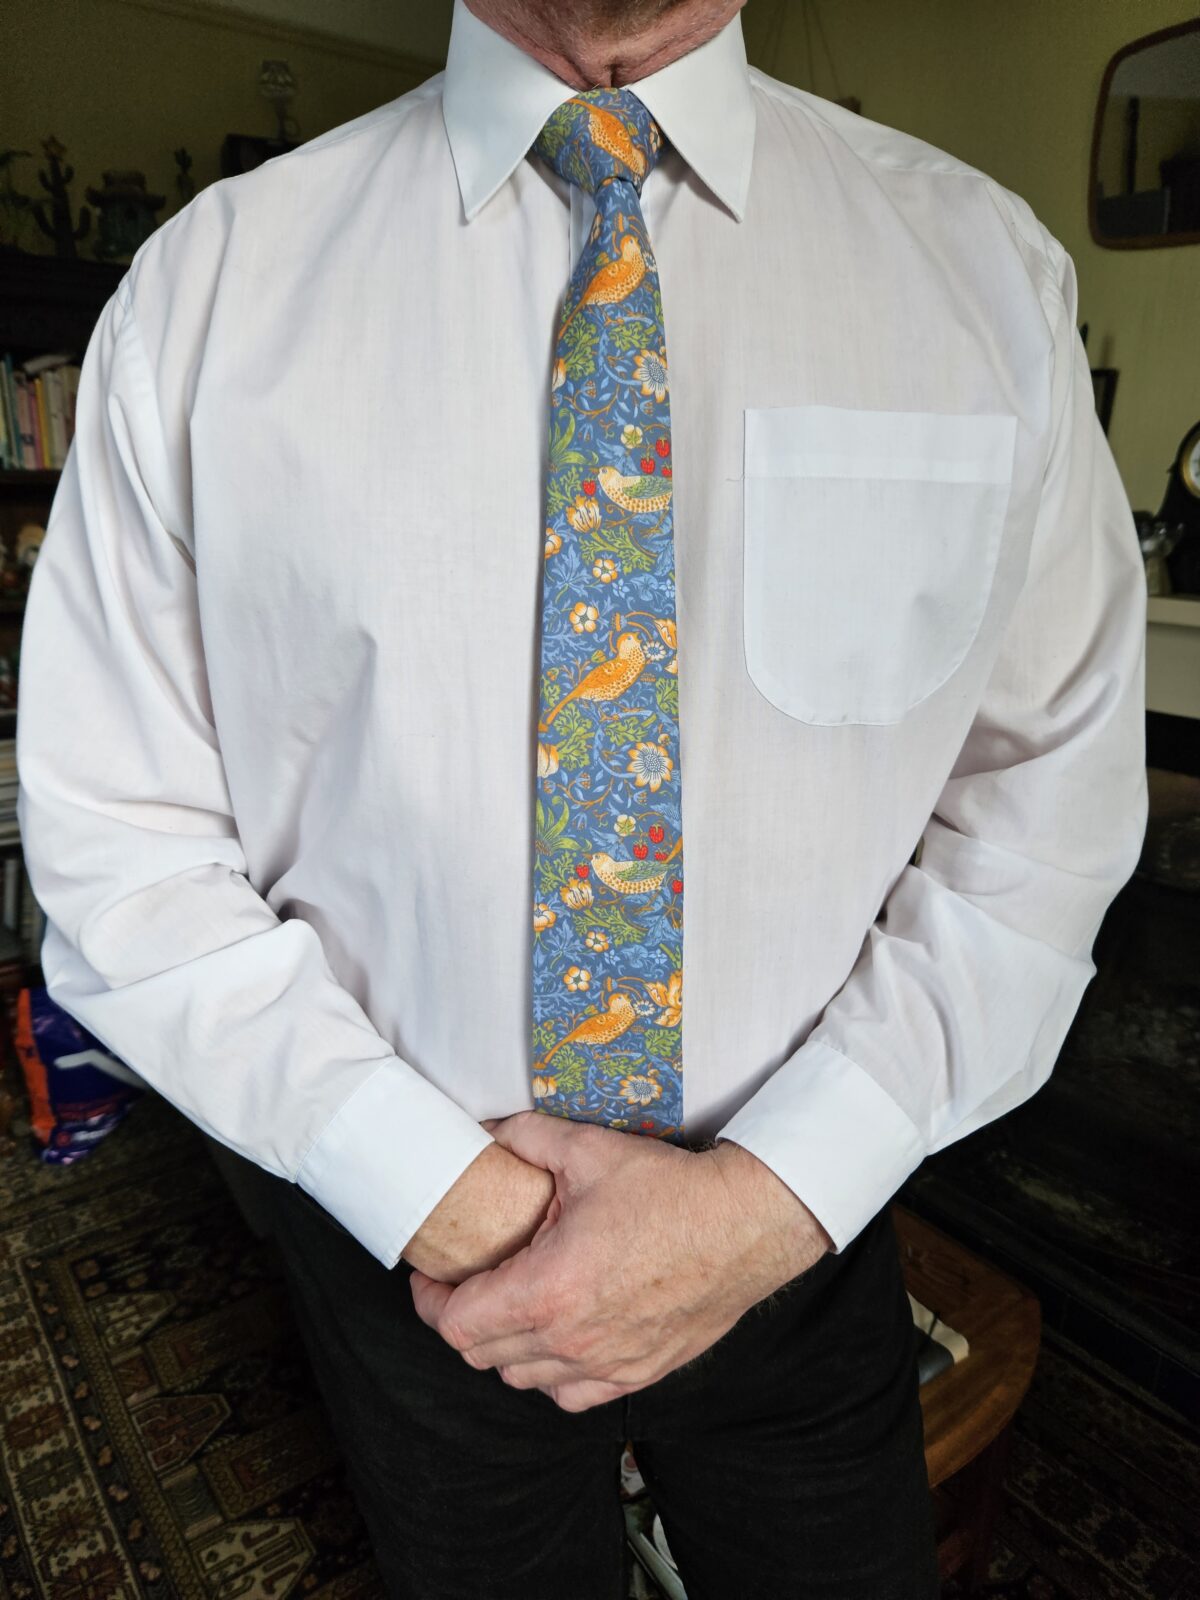 Strawberry Thief Slate Tie from the William Morris range